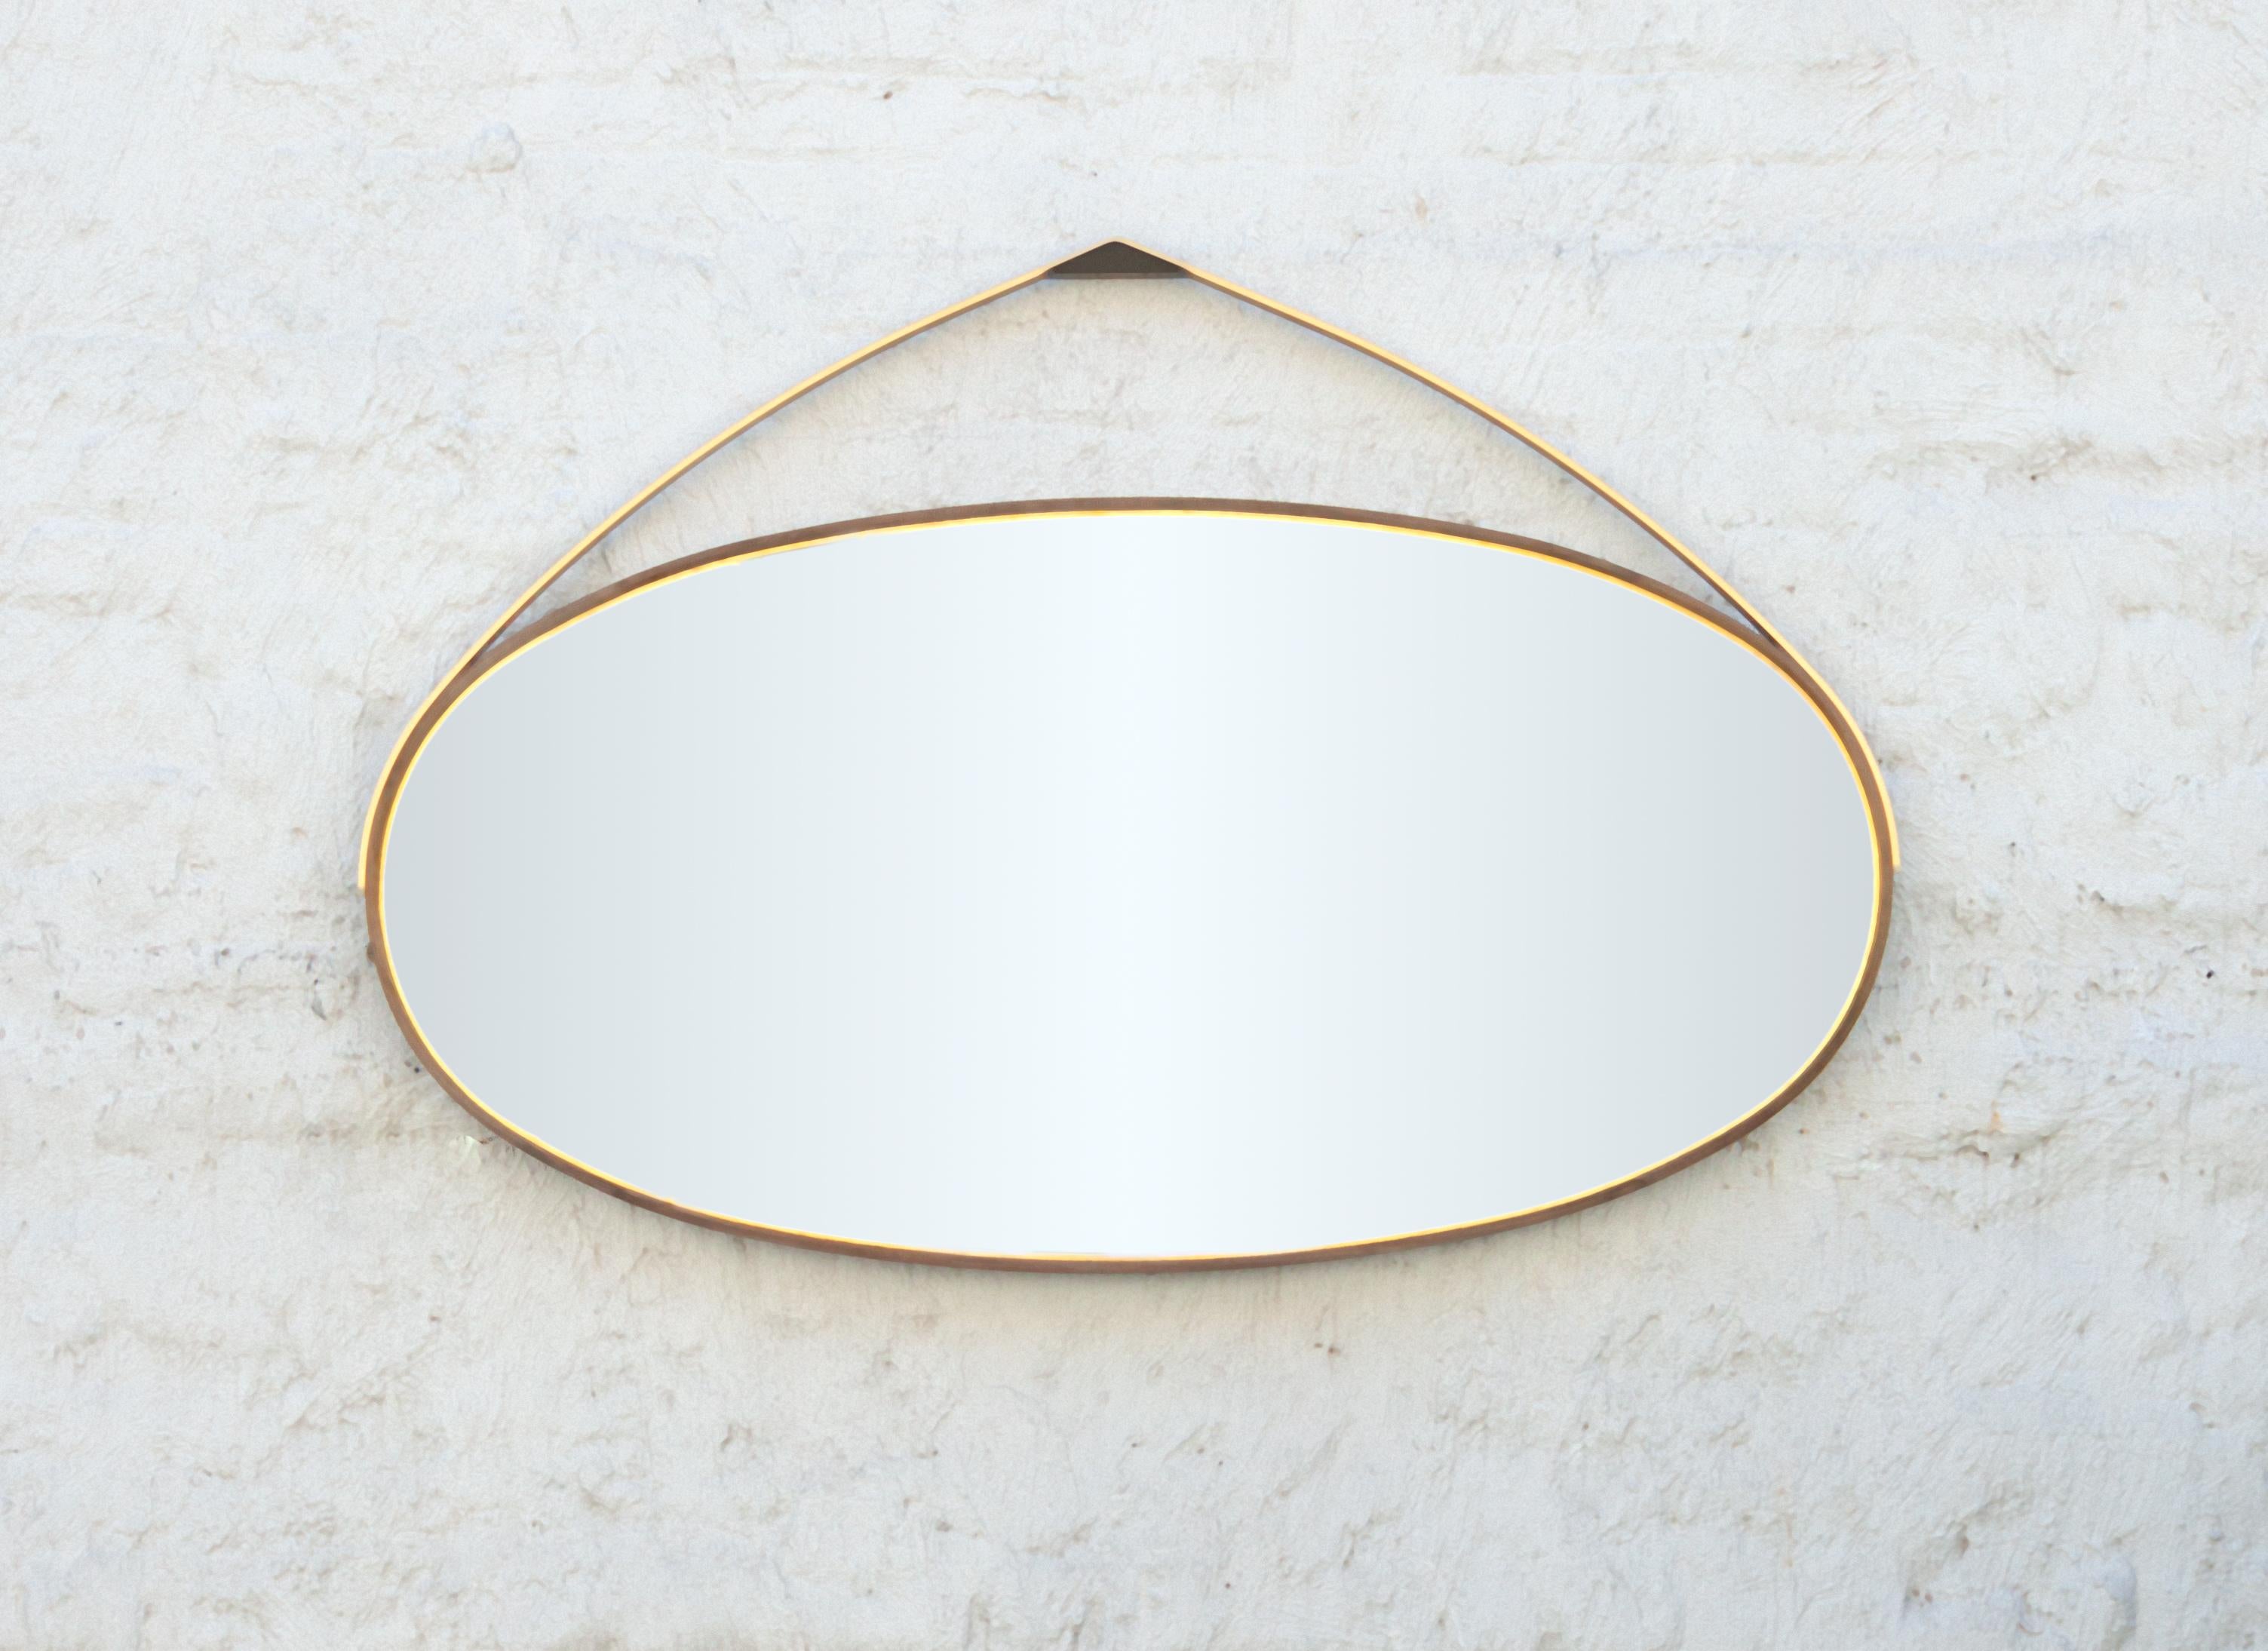 Part of the Gotham collection, the hand-crafted oval mirror features a bronze leaf inlay, a steam-bent oxidized Ambrosia maple frame, and a hand-turned bronze hanging structure, creating elegant curves in this modern design.

Standard size options